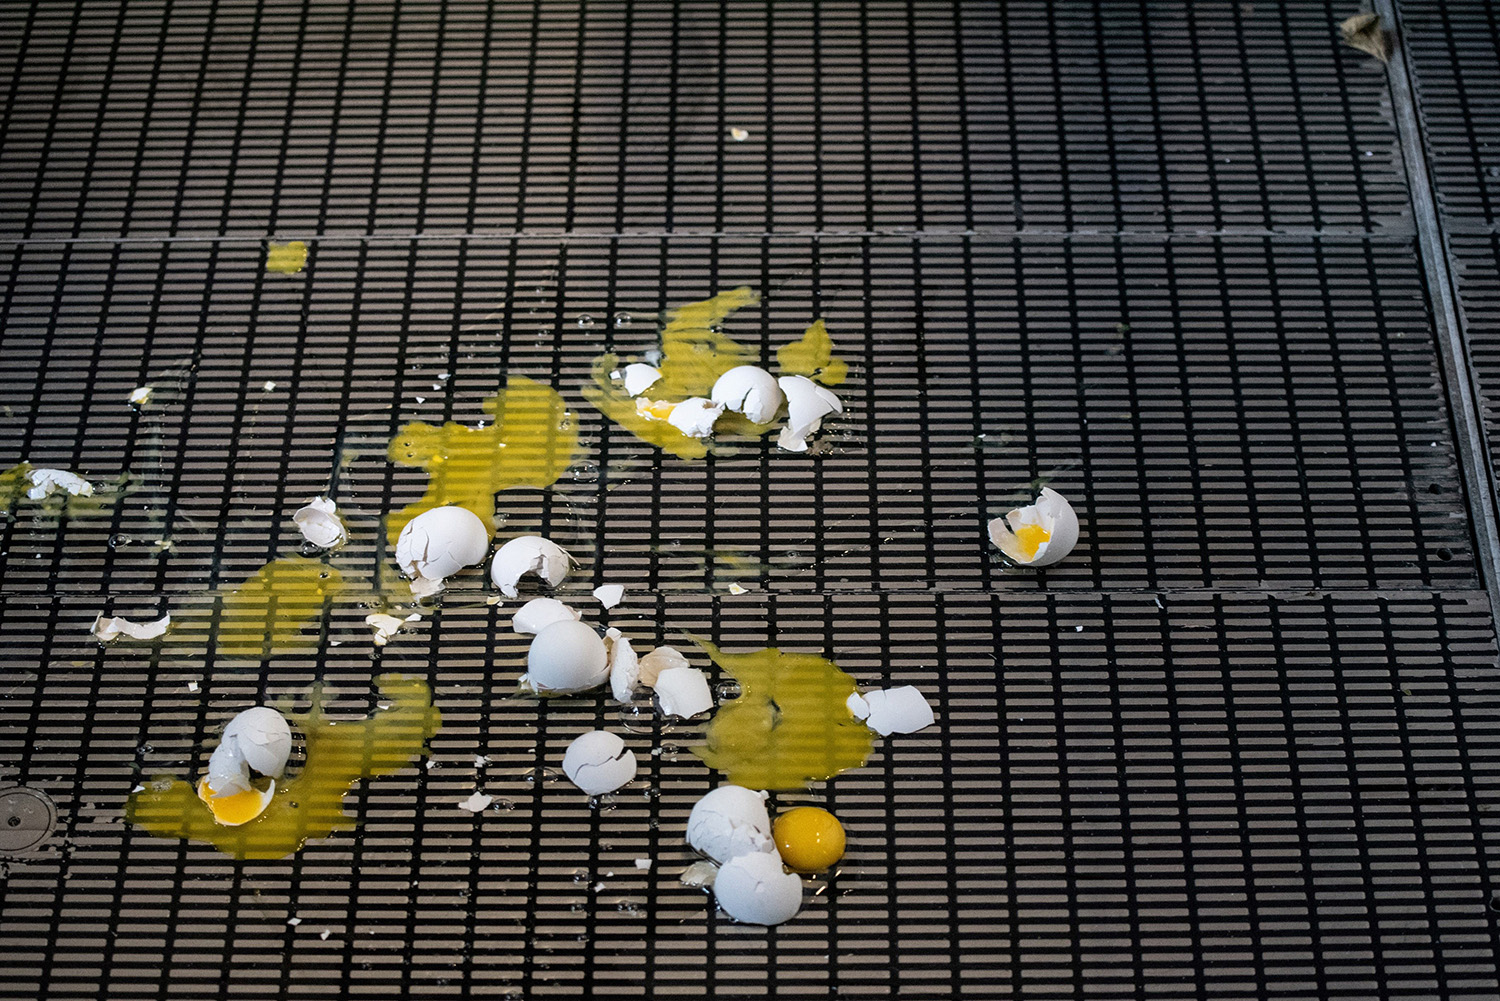 A bunch of broken eggs sitting on a grate after being thrown